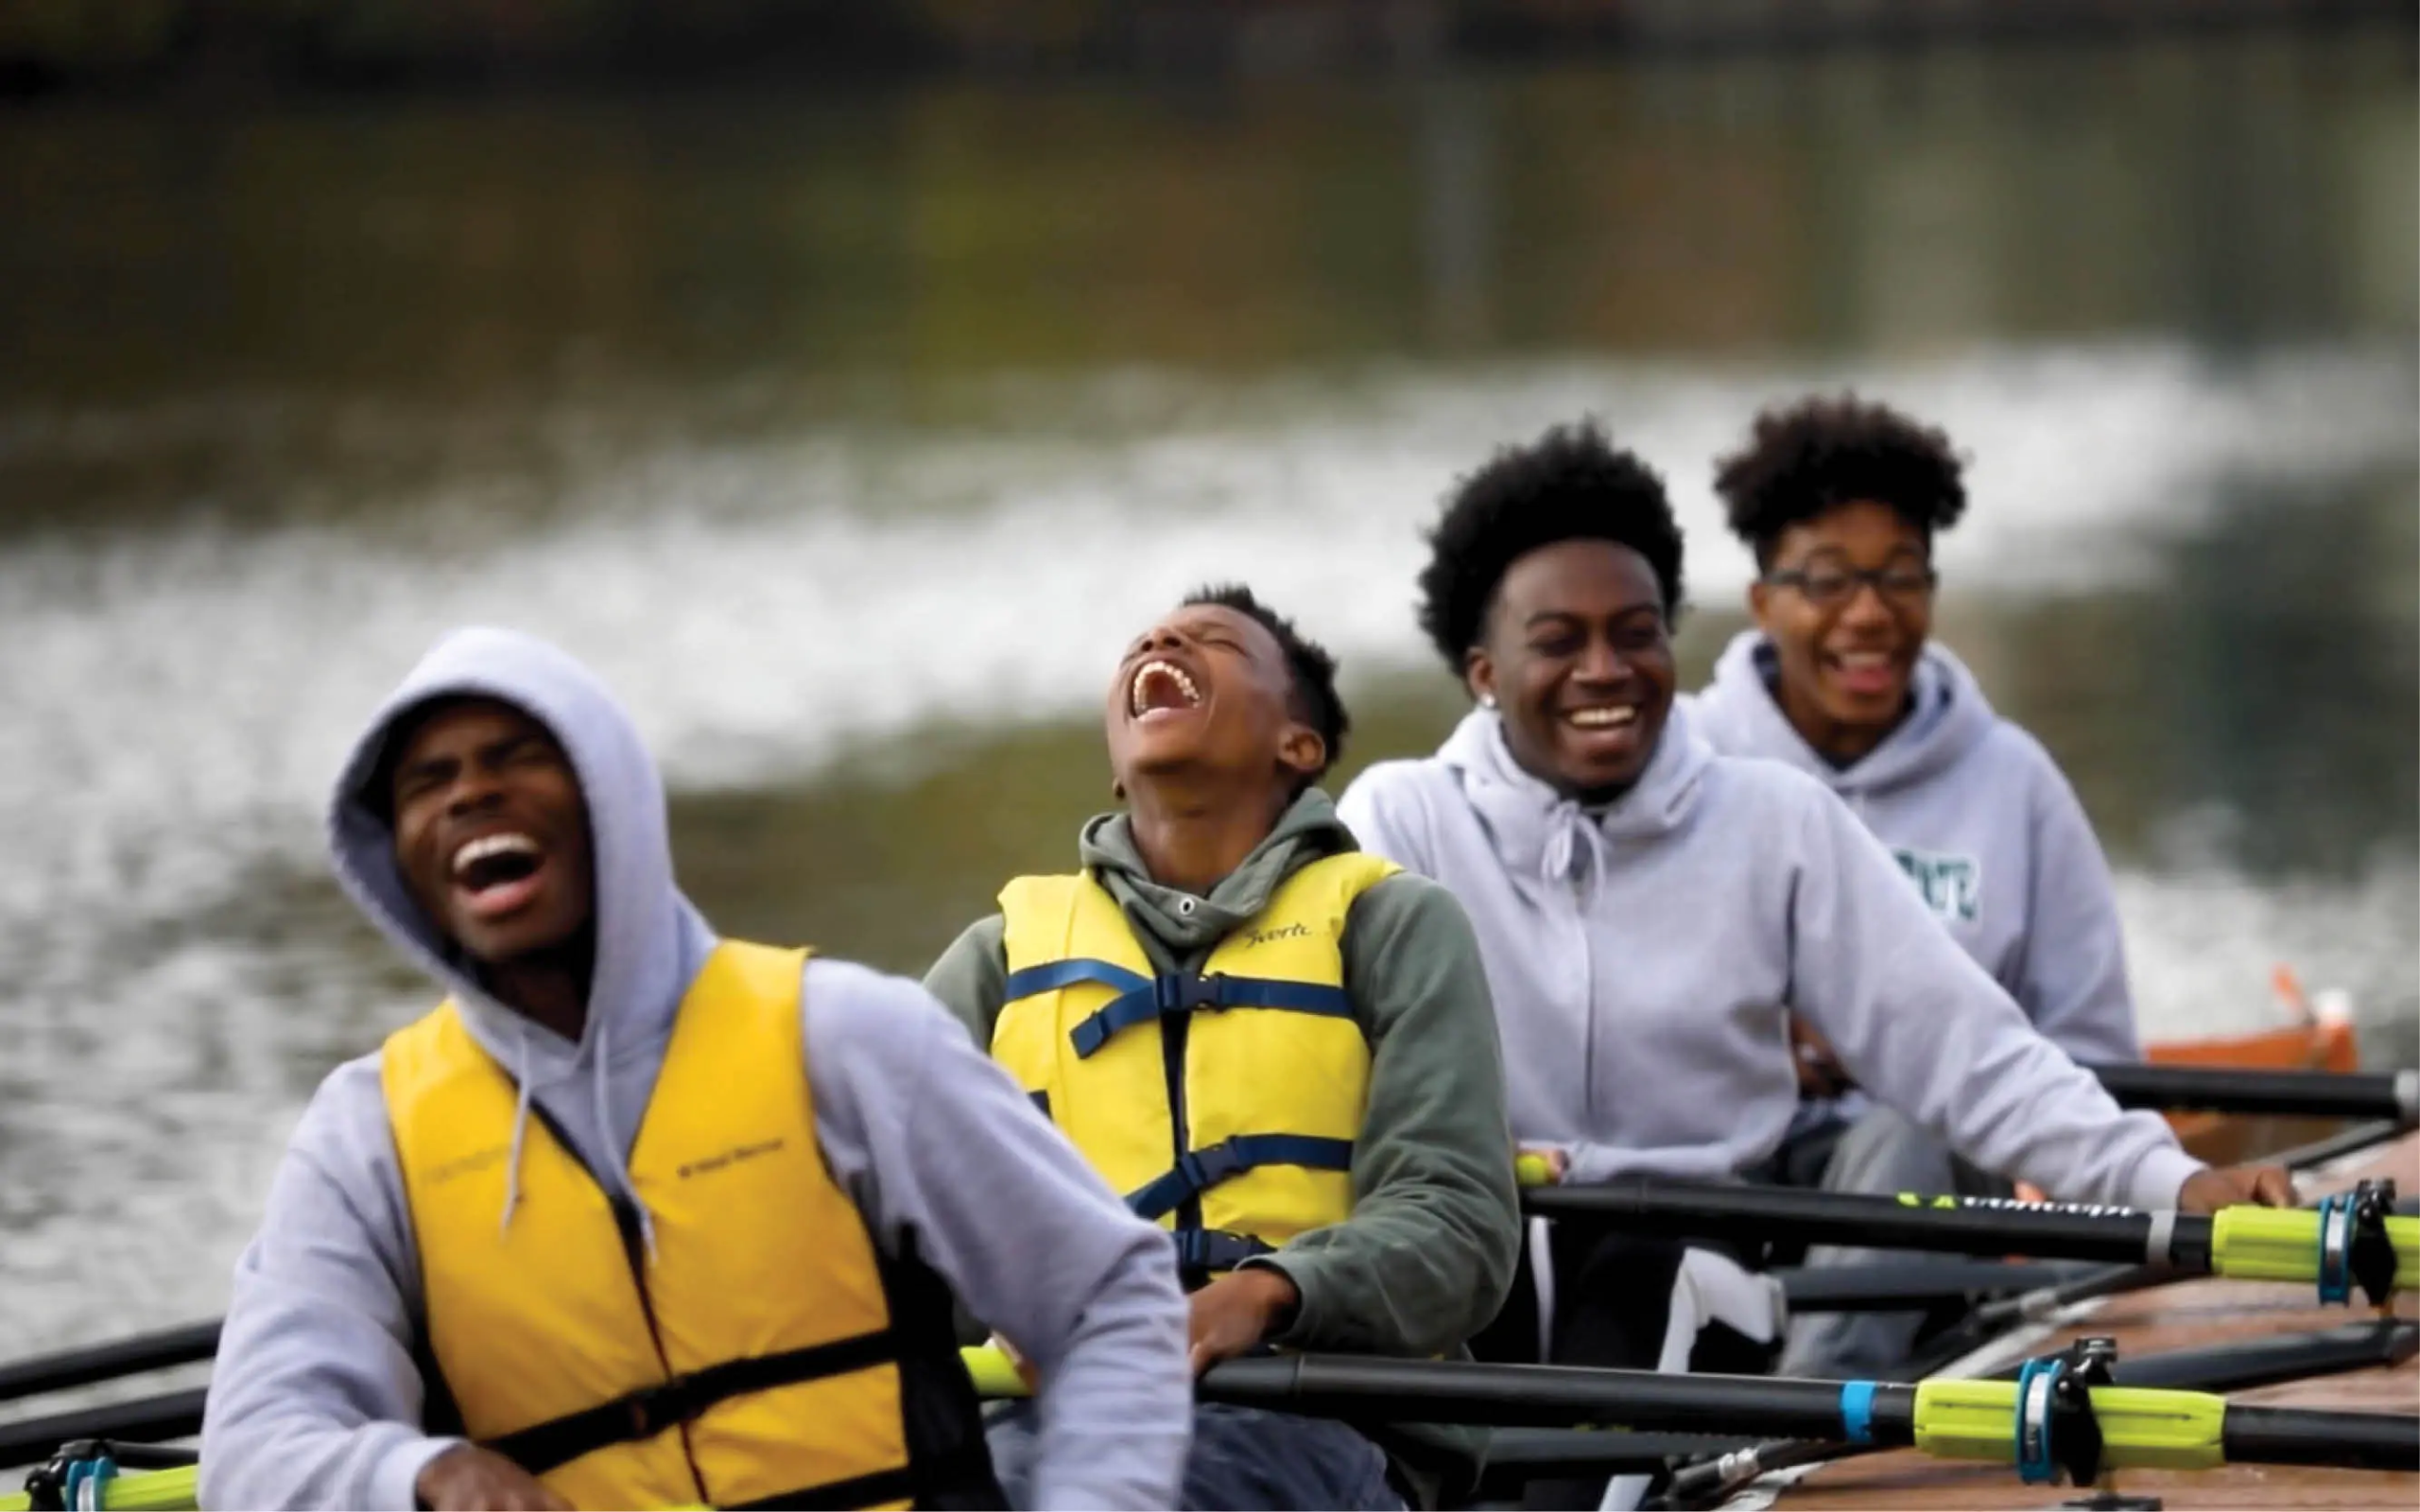 diverse School of ONE students rowing a boat at The Cleveland Foundry